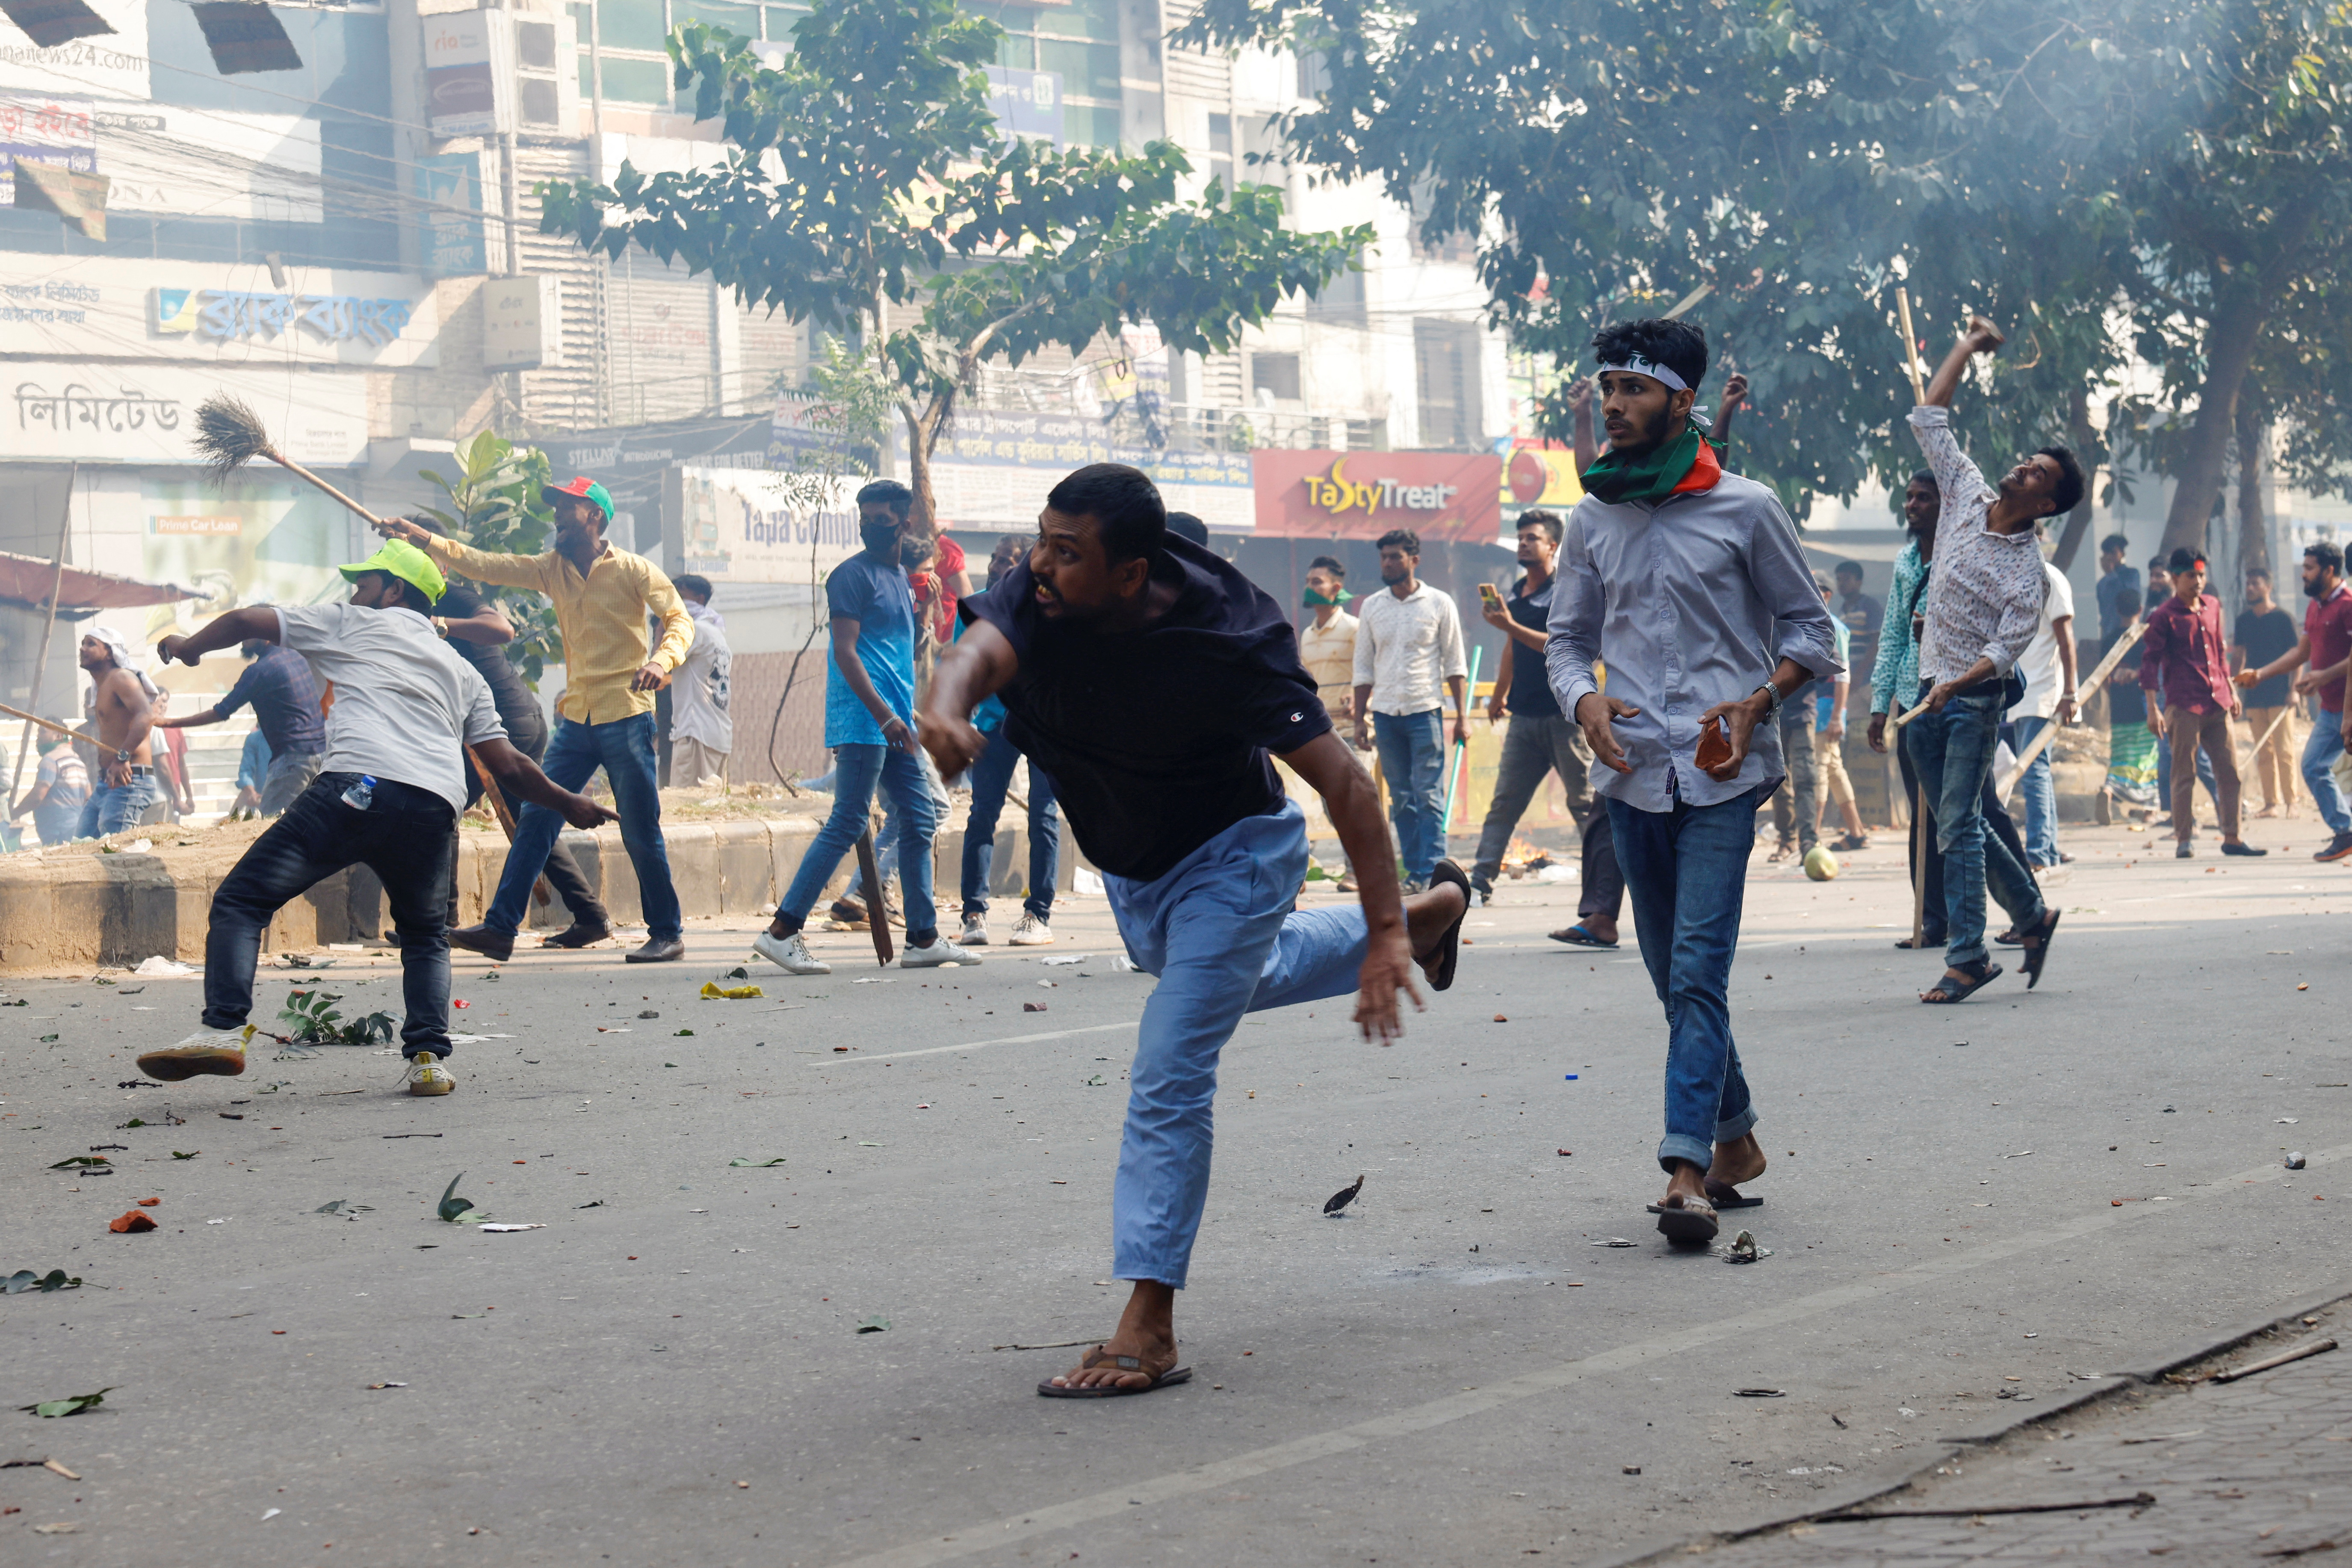 Supporters of Bangladesh Nationalist Party (BNP) throw brickbats towards police during a clash in Dhaka